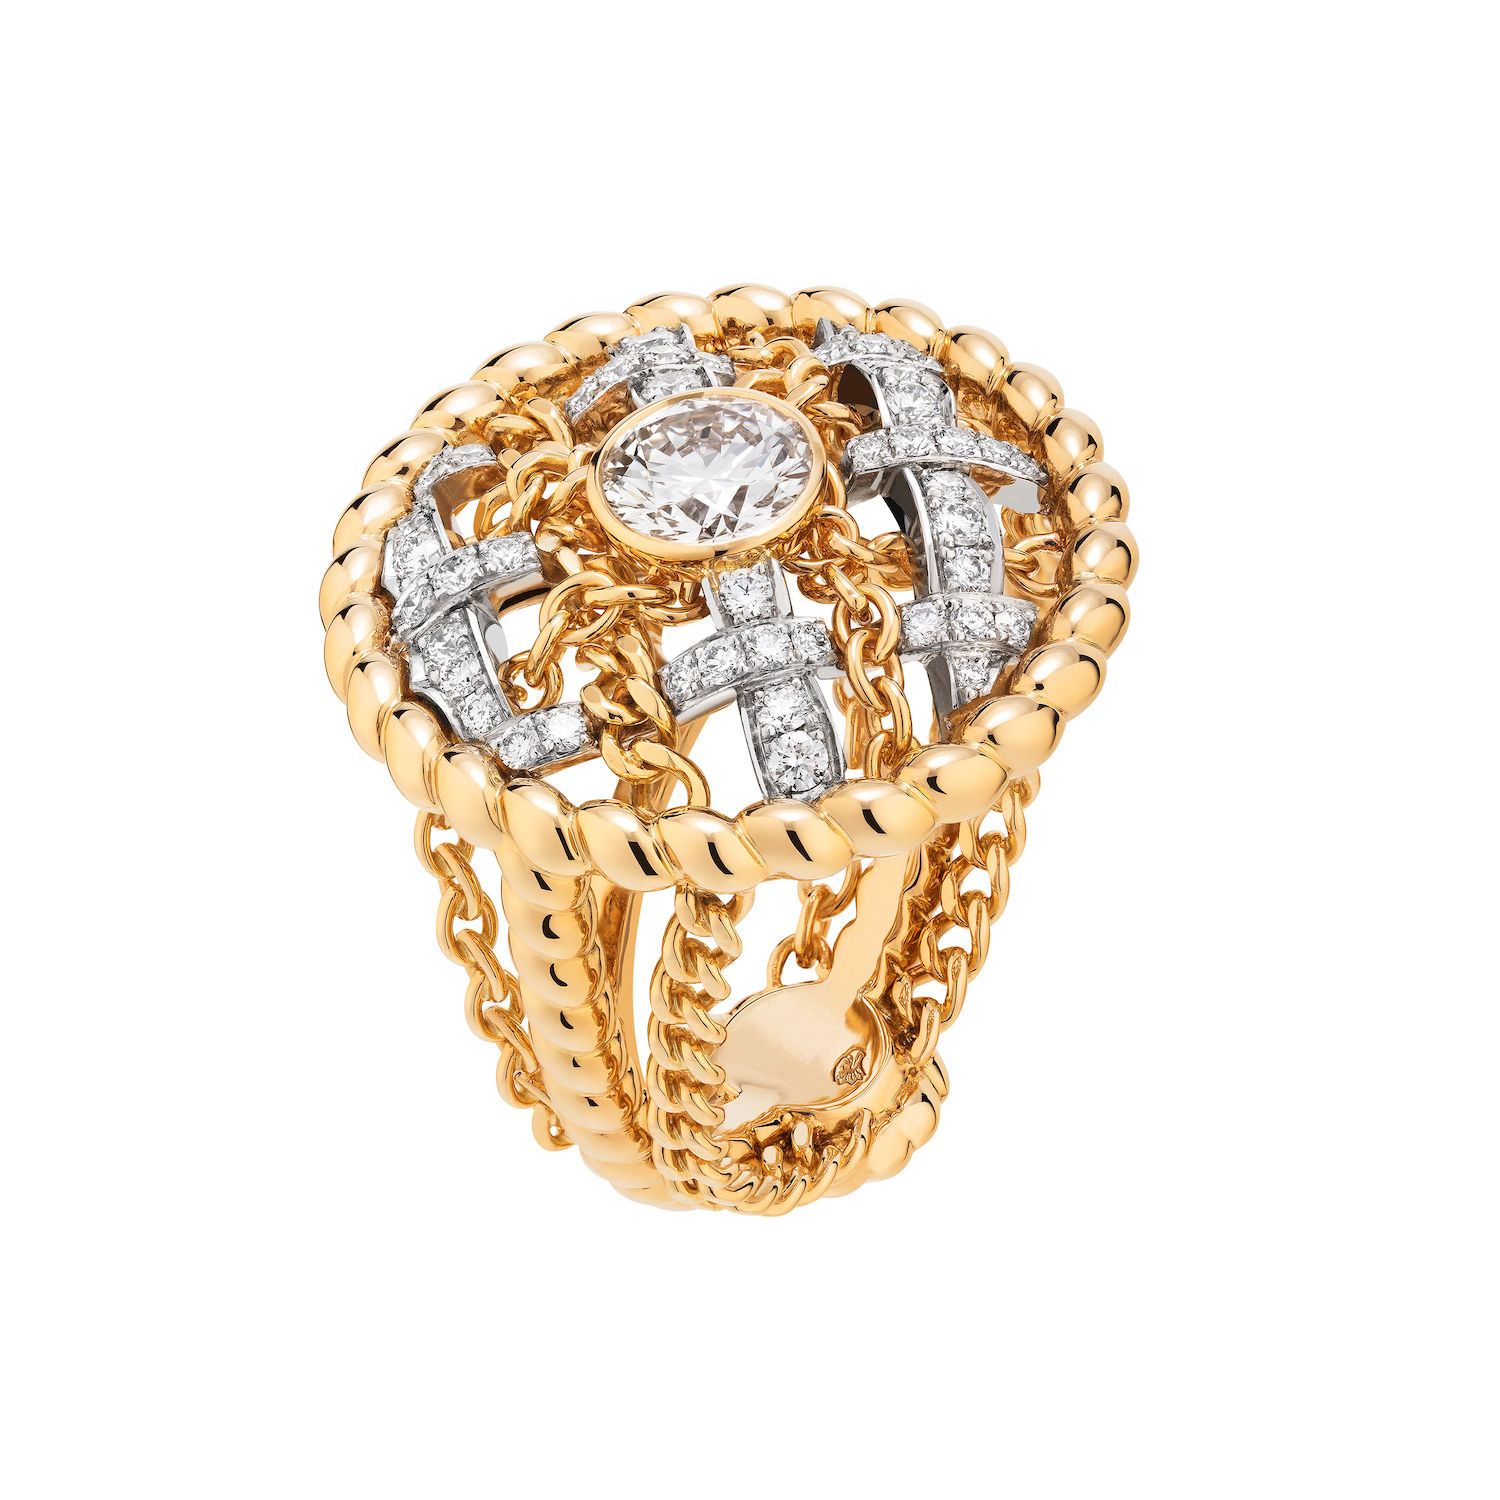 Chanel's New High Jewelry Collection, Tweed De Chanel, is an Ode